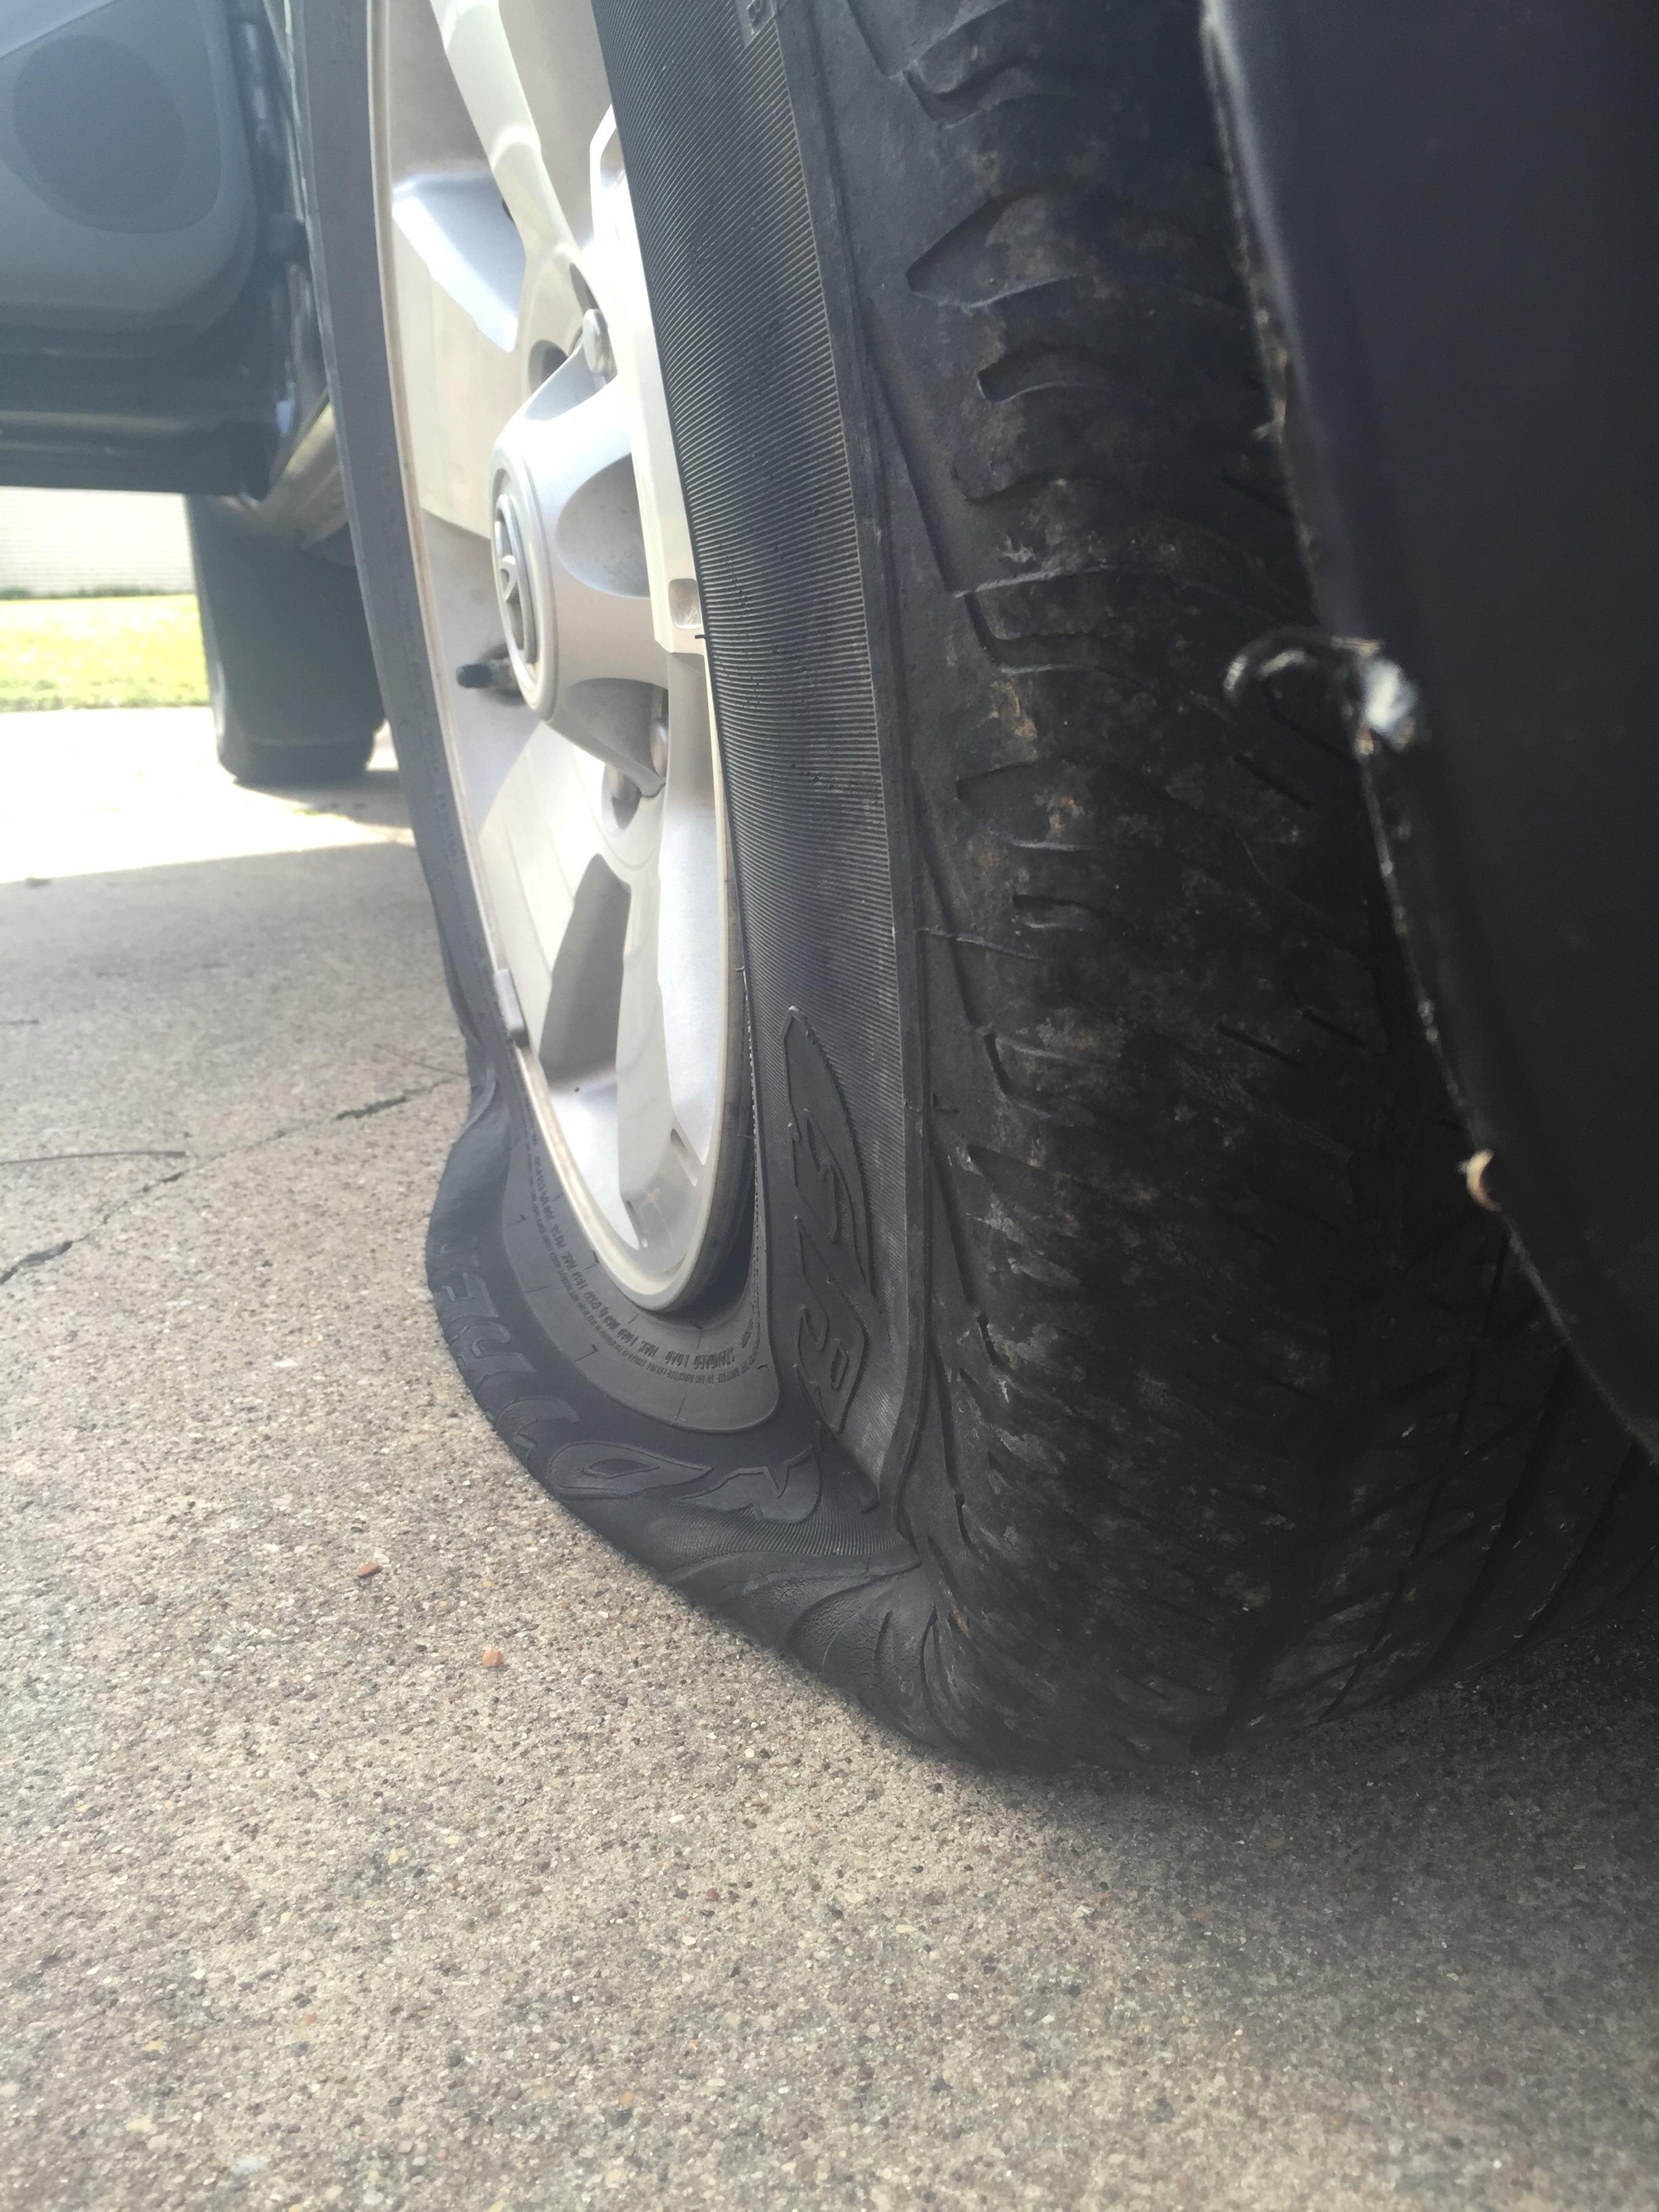 "Walked outside this morning to find that my tire had gone flat overnight."